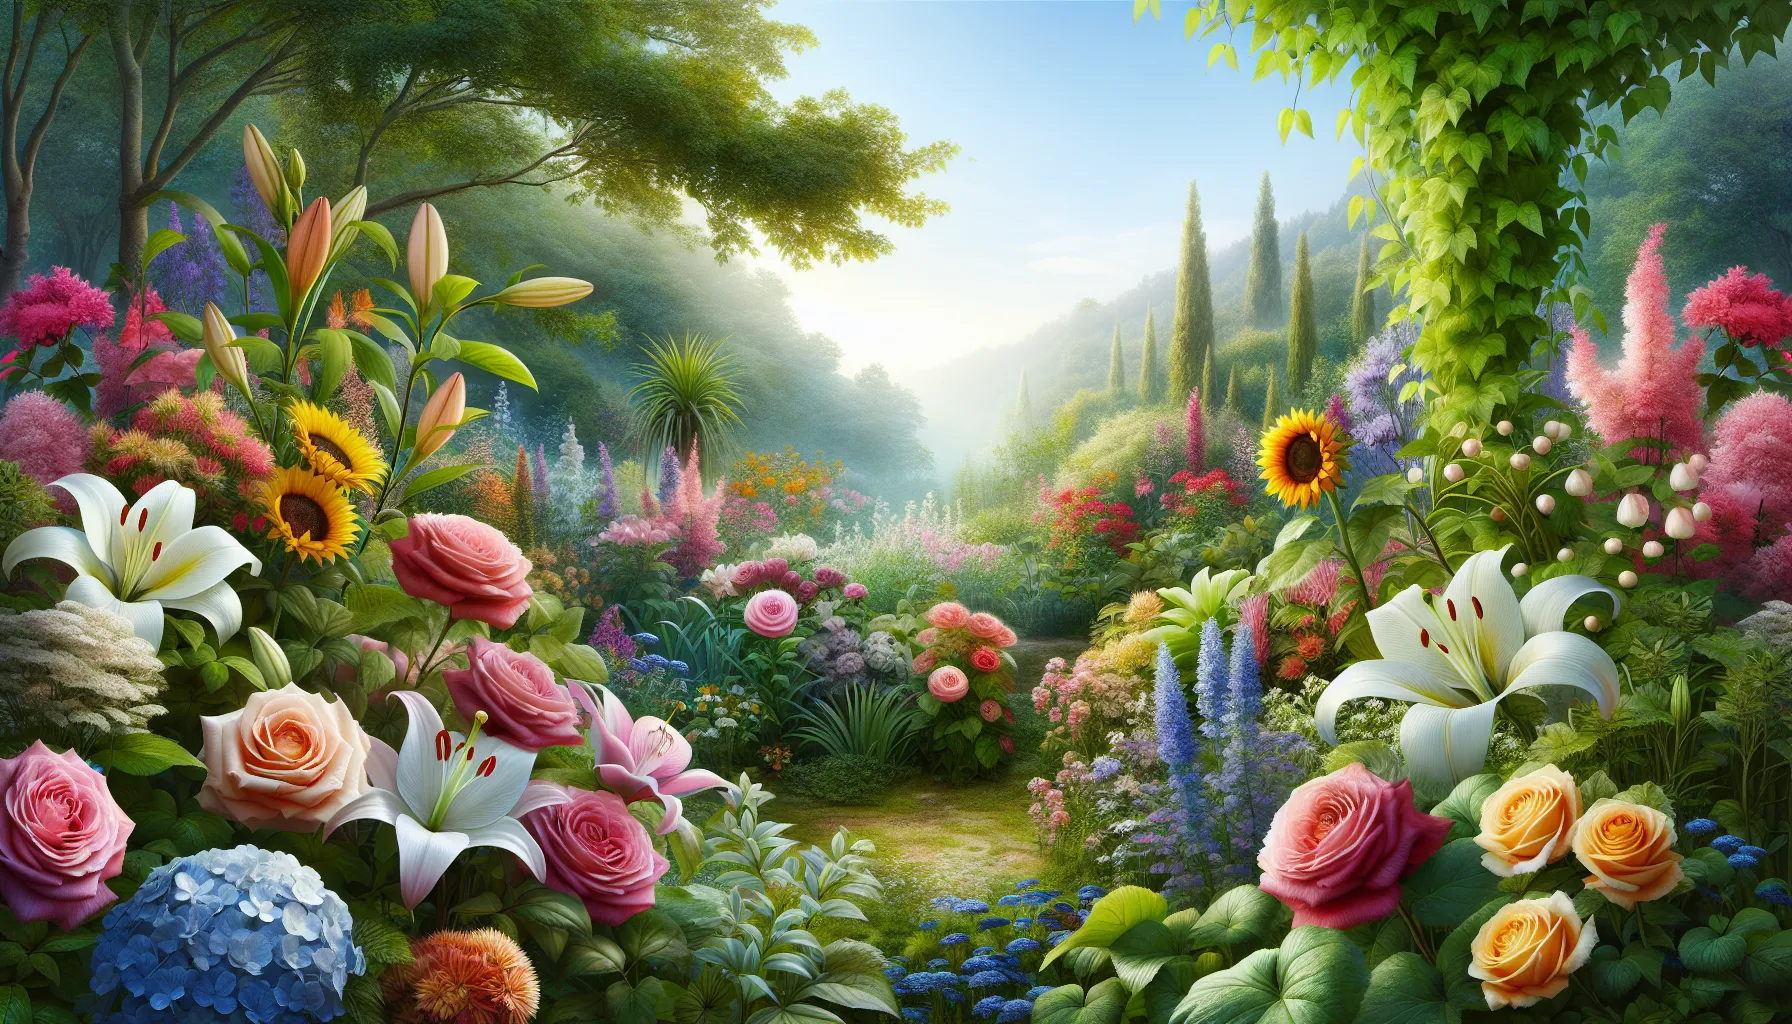 An enchanting garden path lined with a vibrant array of flowers and plants, leading into a misty, sunlit forest.